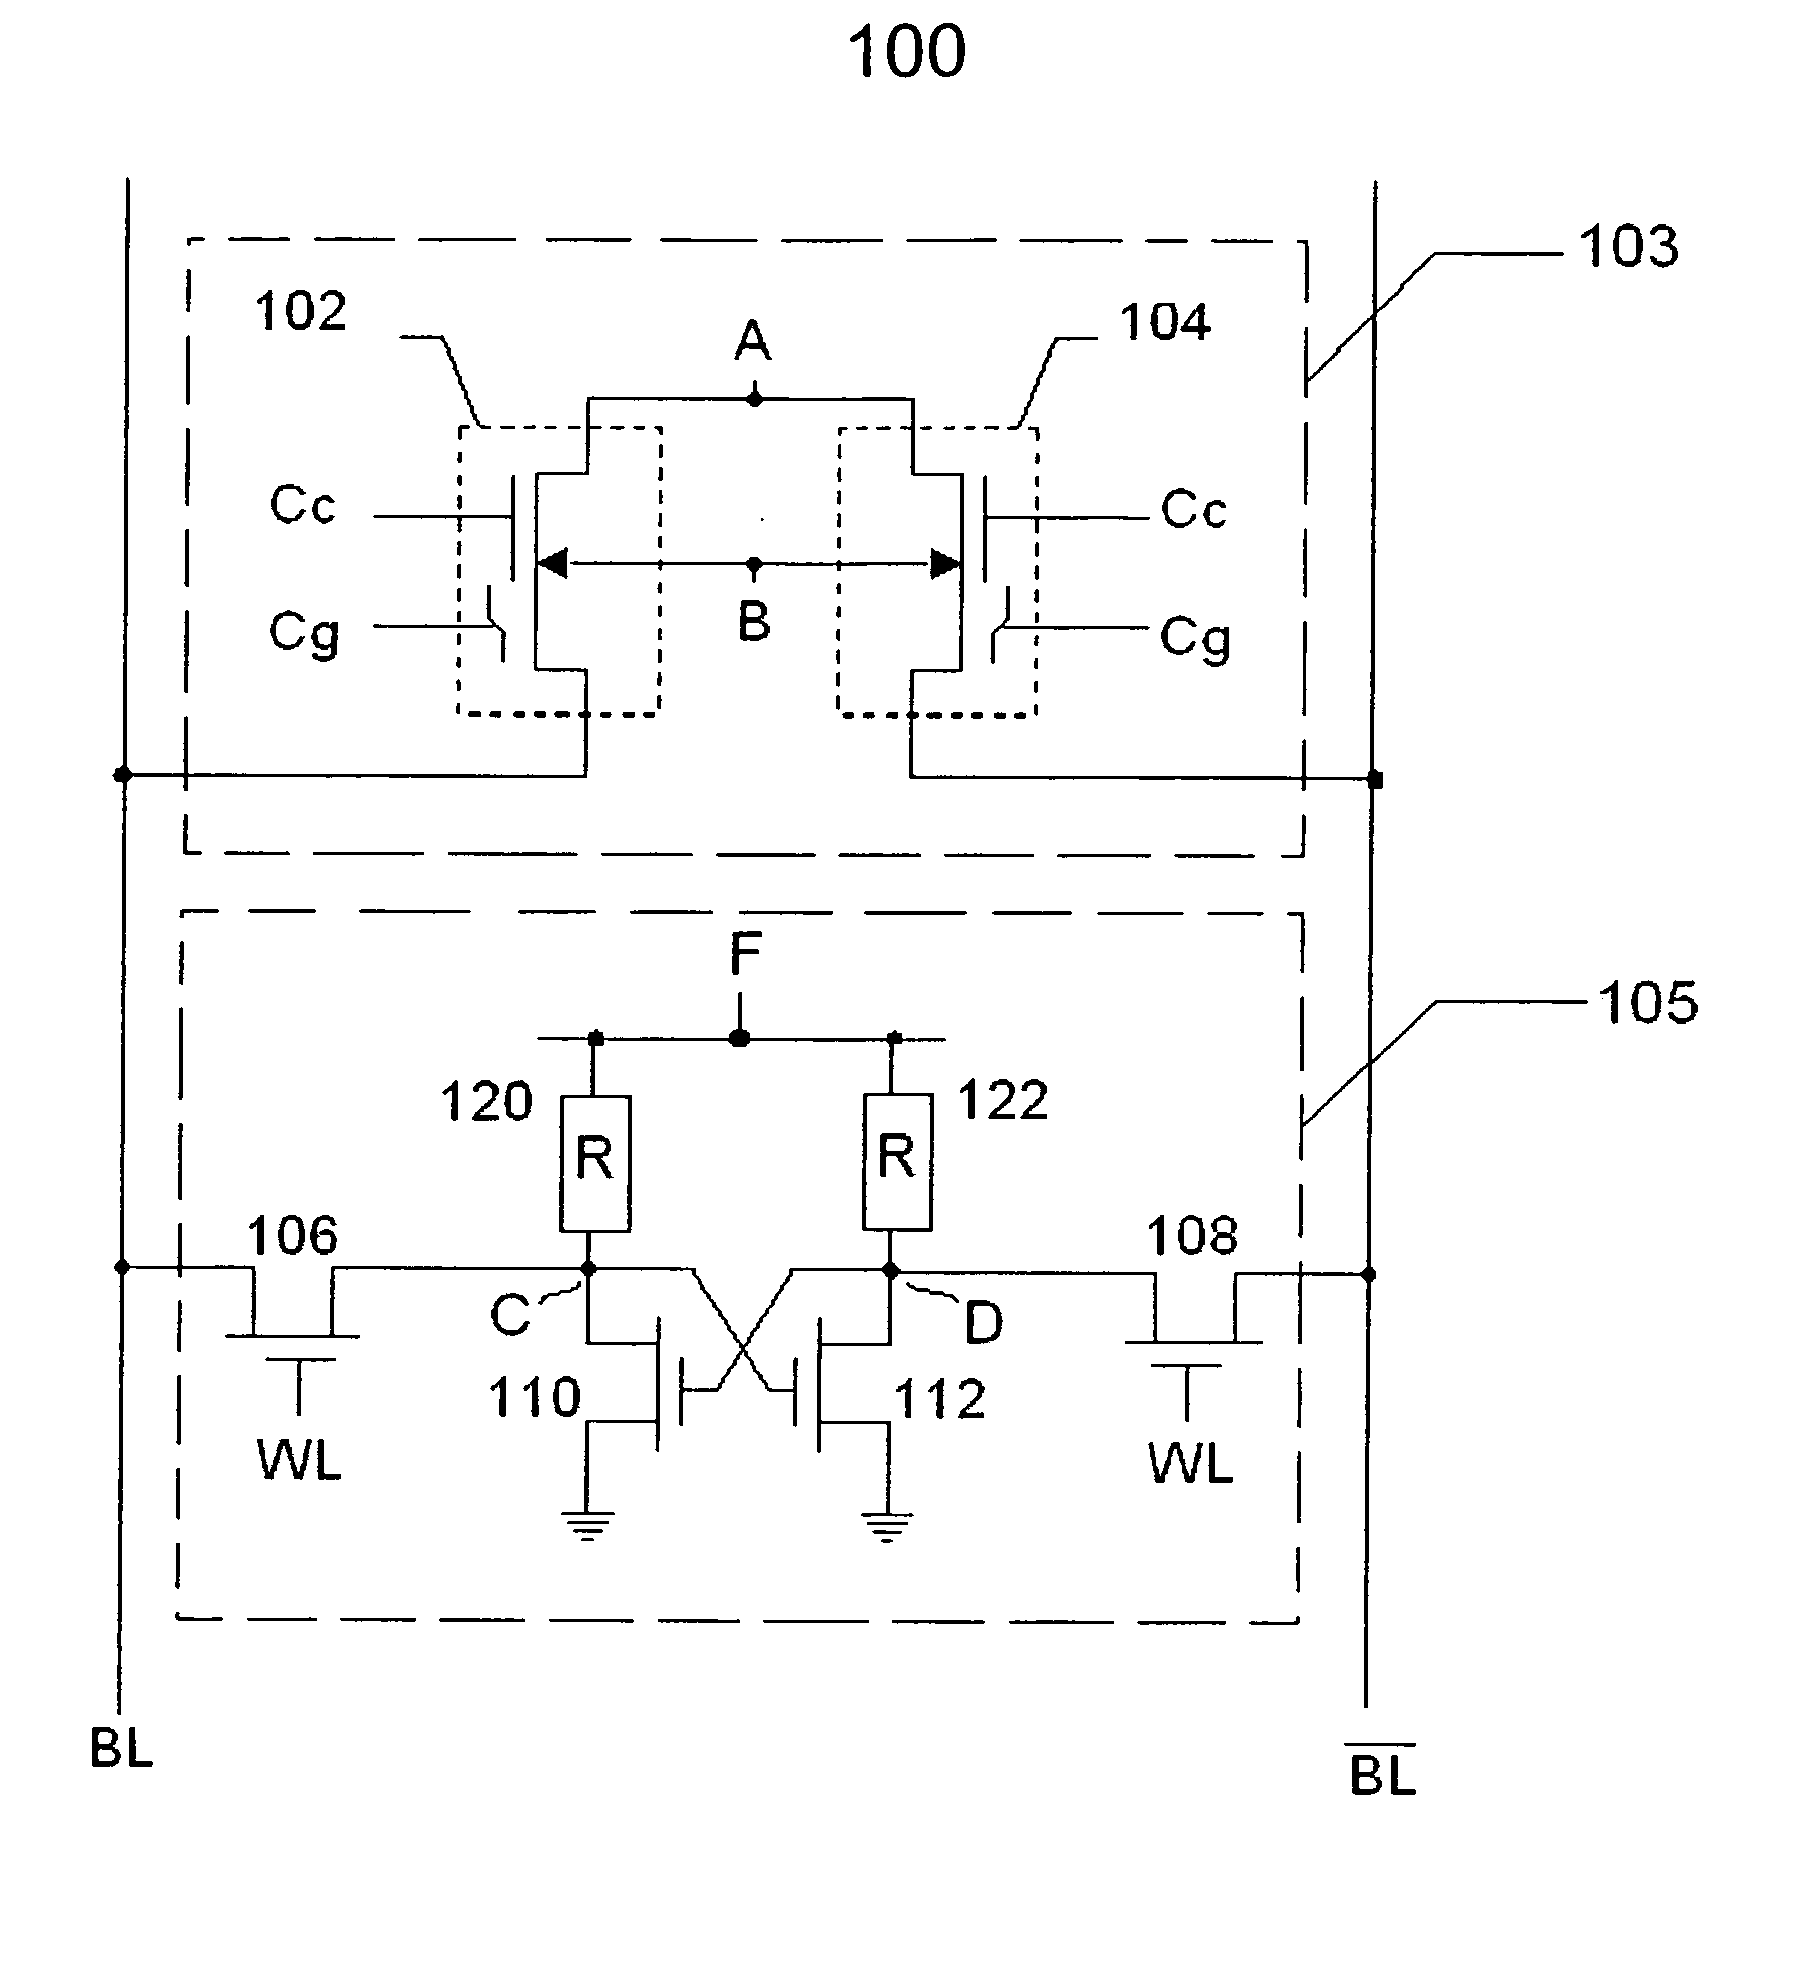 Non-volatile and static random access memory cells sharing the same bitlines